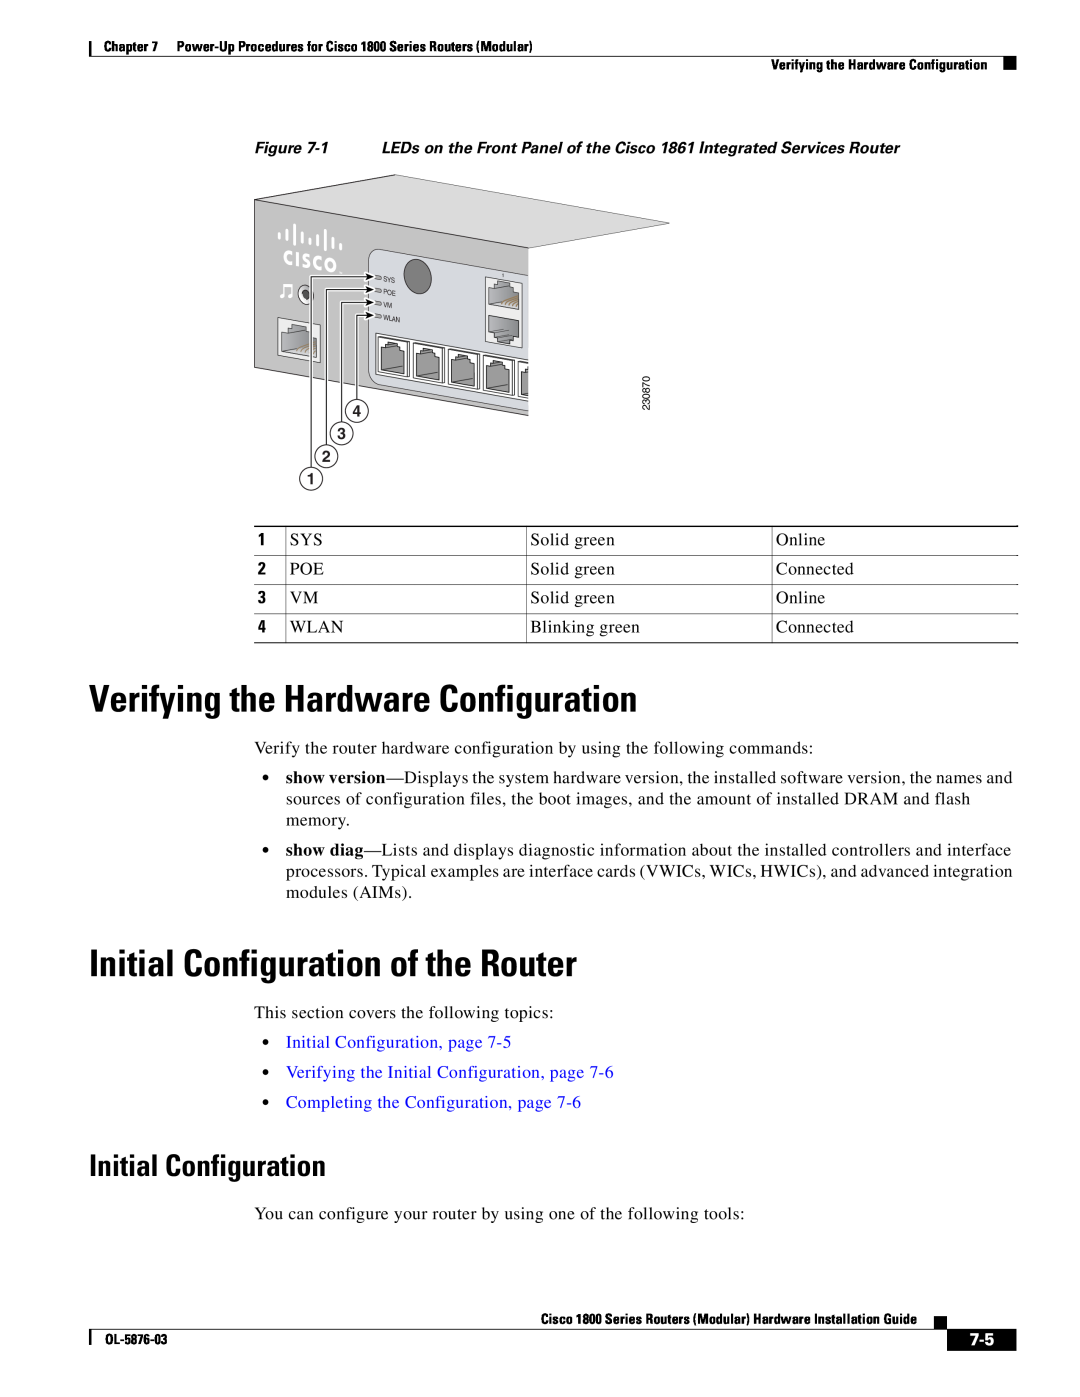 Cisco Systems CISCO1841-HSEC/K9-RF manual Verifying the Hardware Configuration, Initial Configuration of the Router 